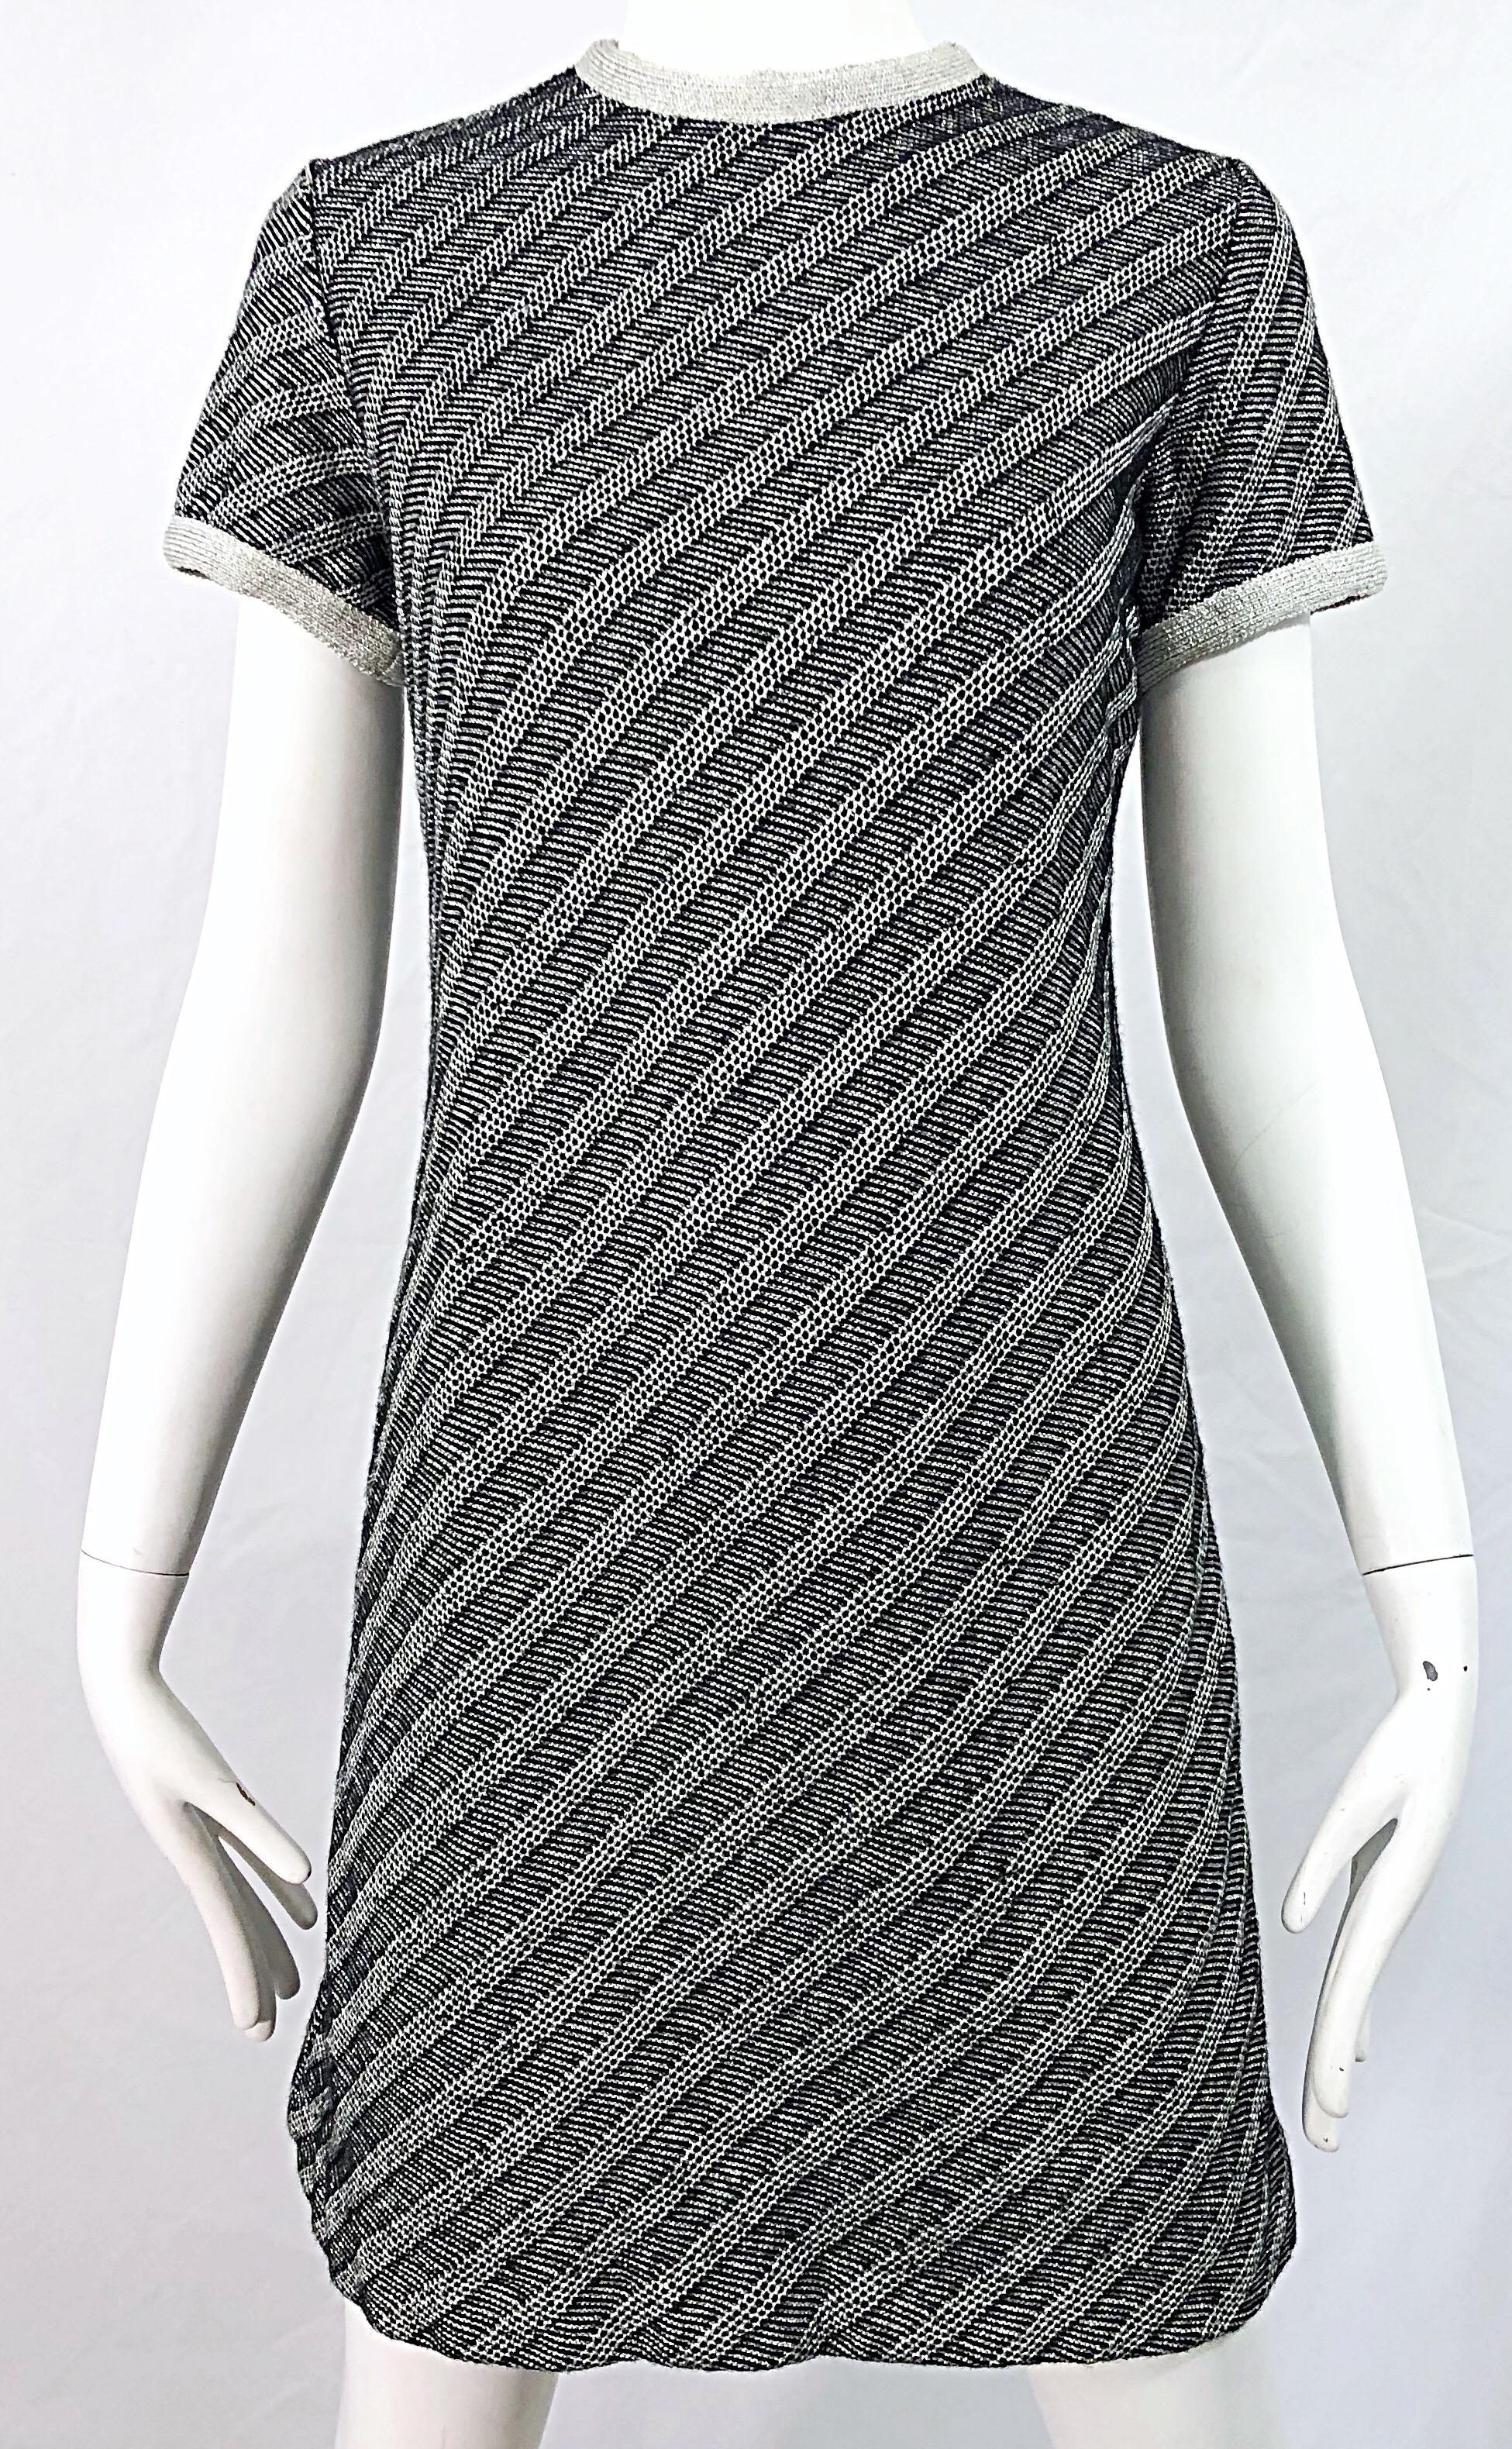 Women's Chic 1960s Black and Silver Metallic Knit Vintage Striped 60s Shift Dress For Sale